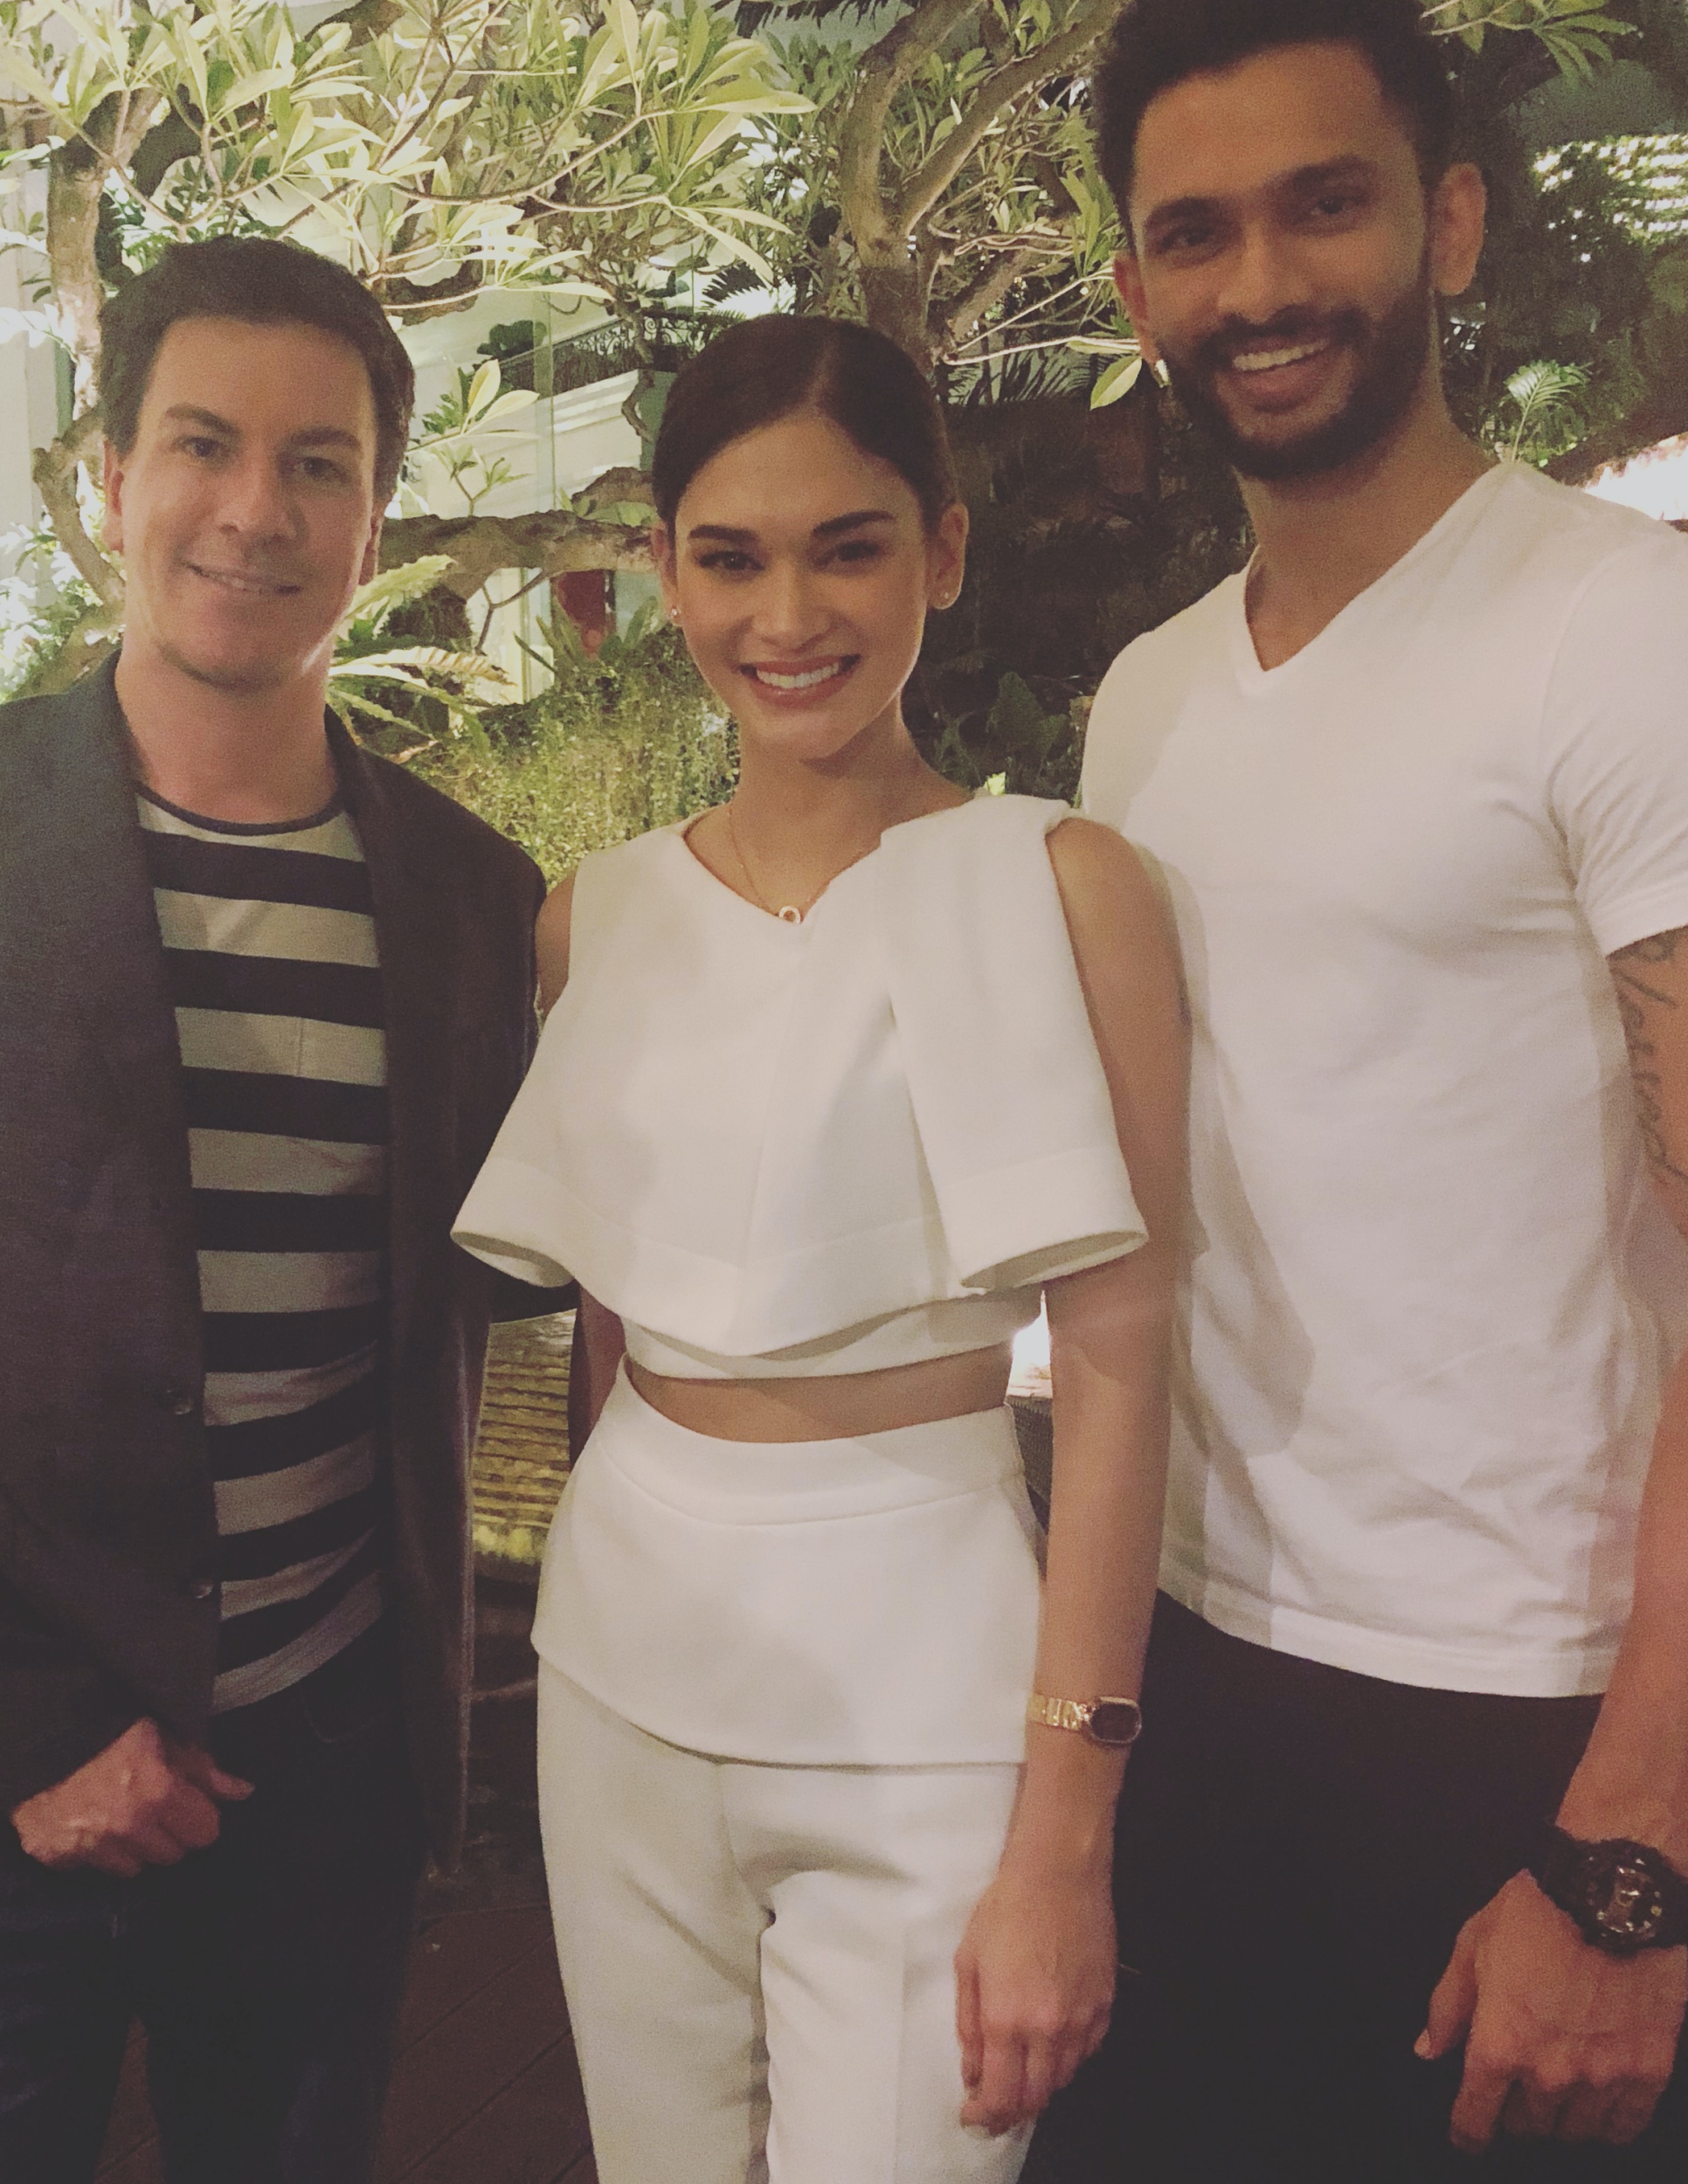 Andre Sleigh and Mister Supranational 2018 Prathamesh Maulingkar from India with Miss Universe 2015 Pia Wurtzbach from the Philippines